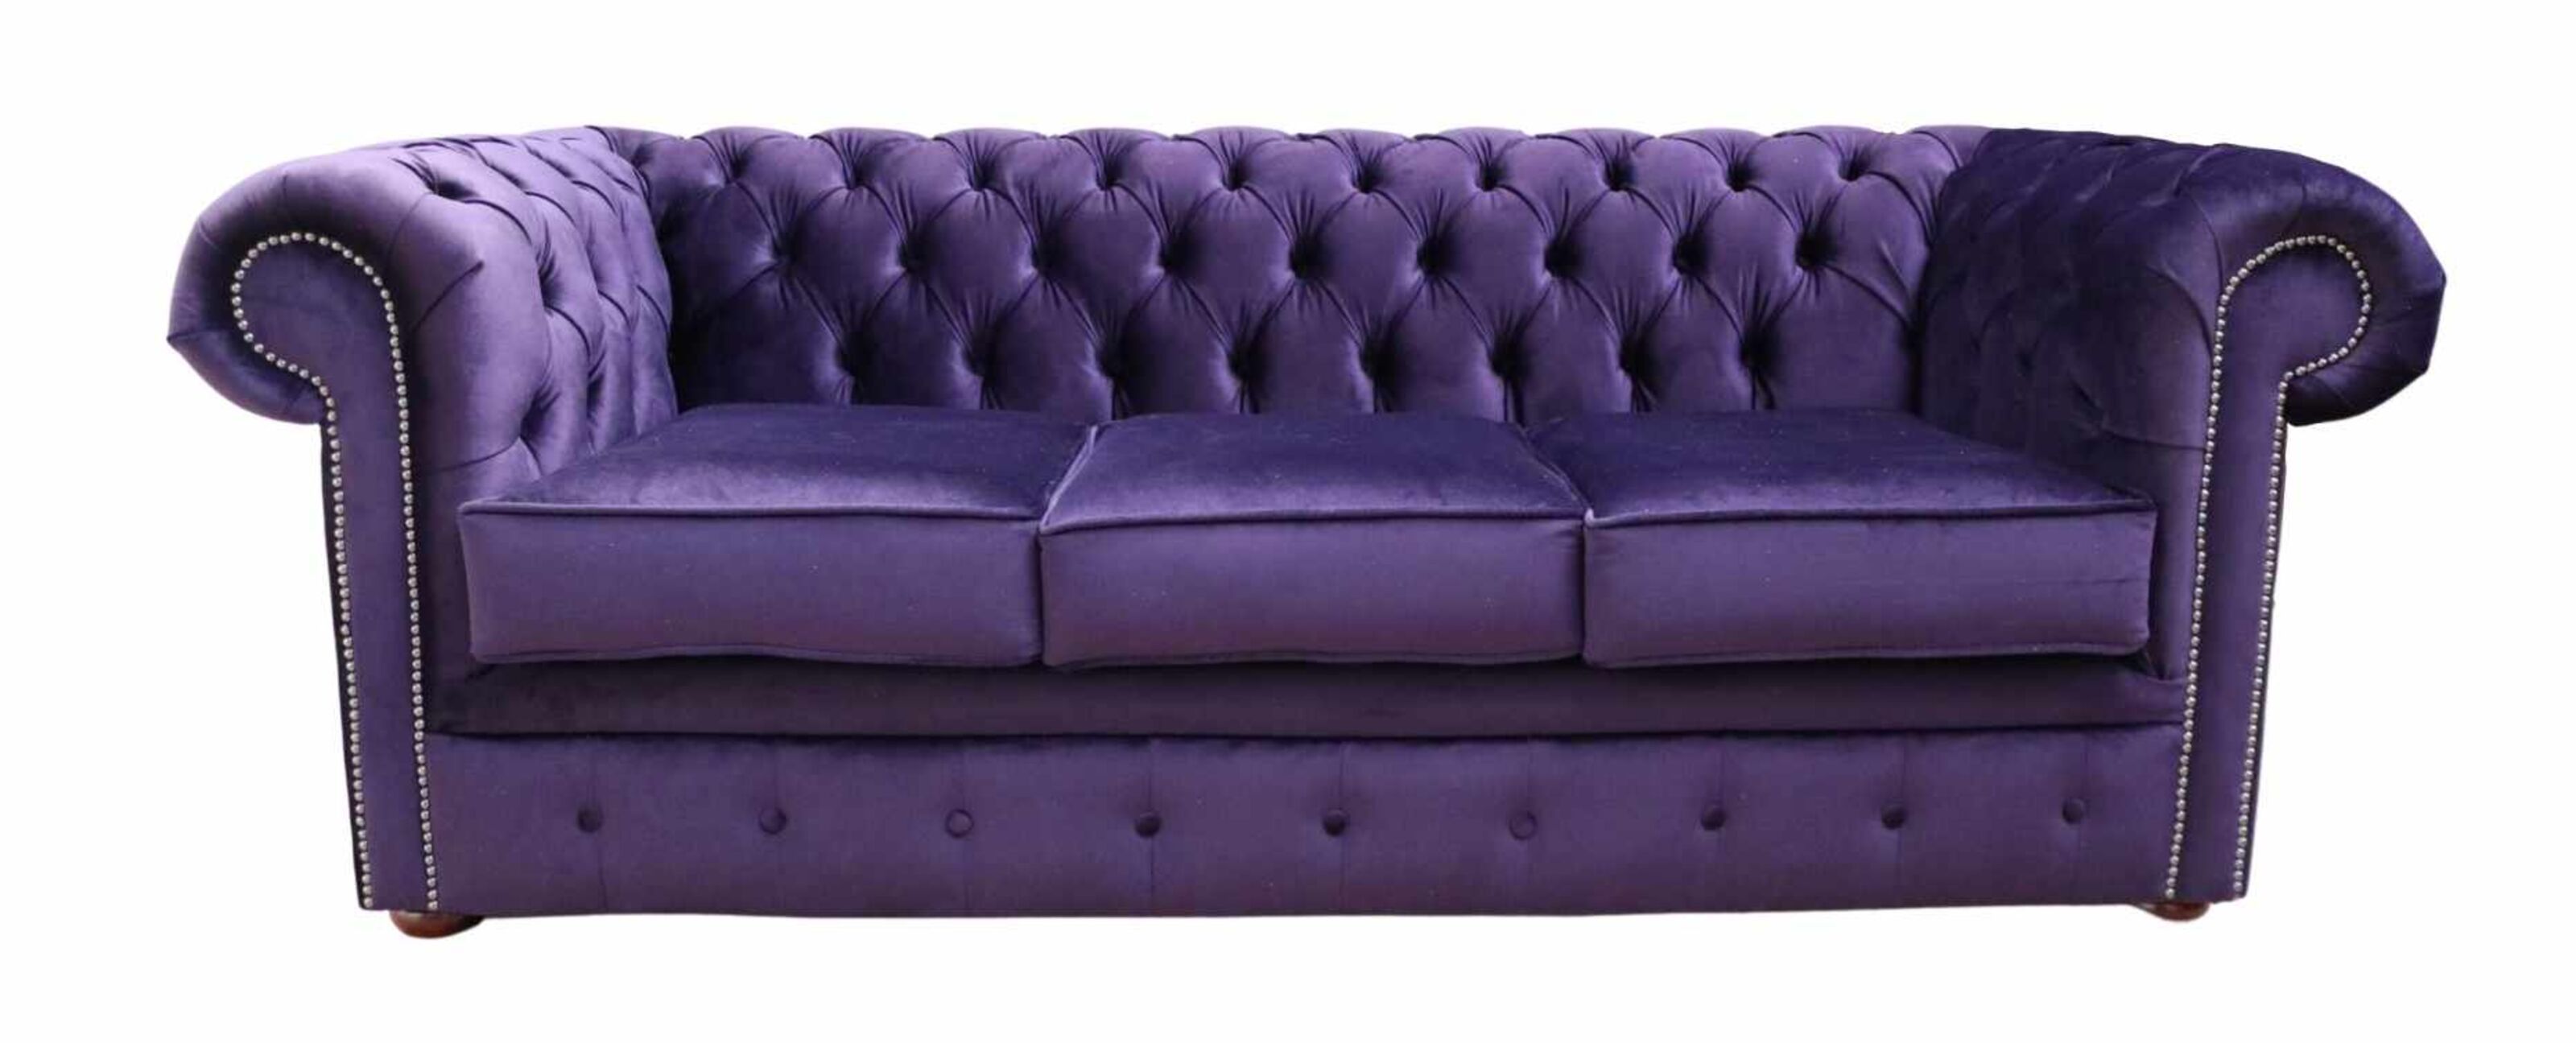 Find Your Perfect Piece Exploring Available Chesterfield Sofas  %Post Title